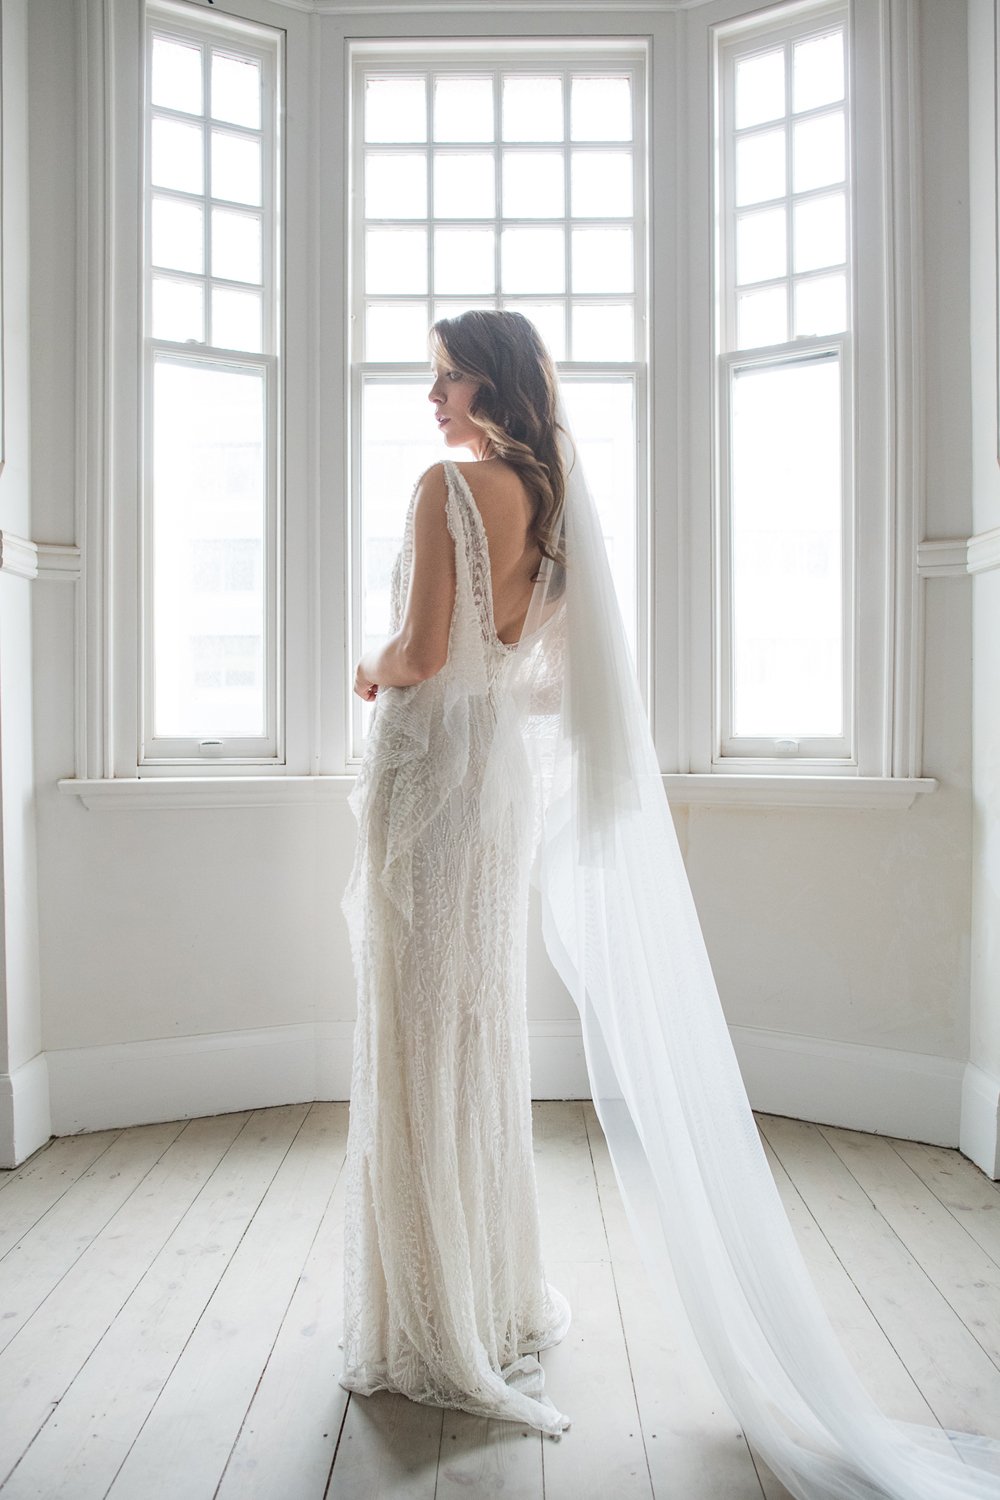 17 Essential Wedding Gown Shopping Tips — unbridely